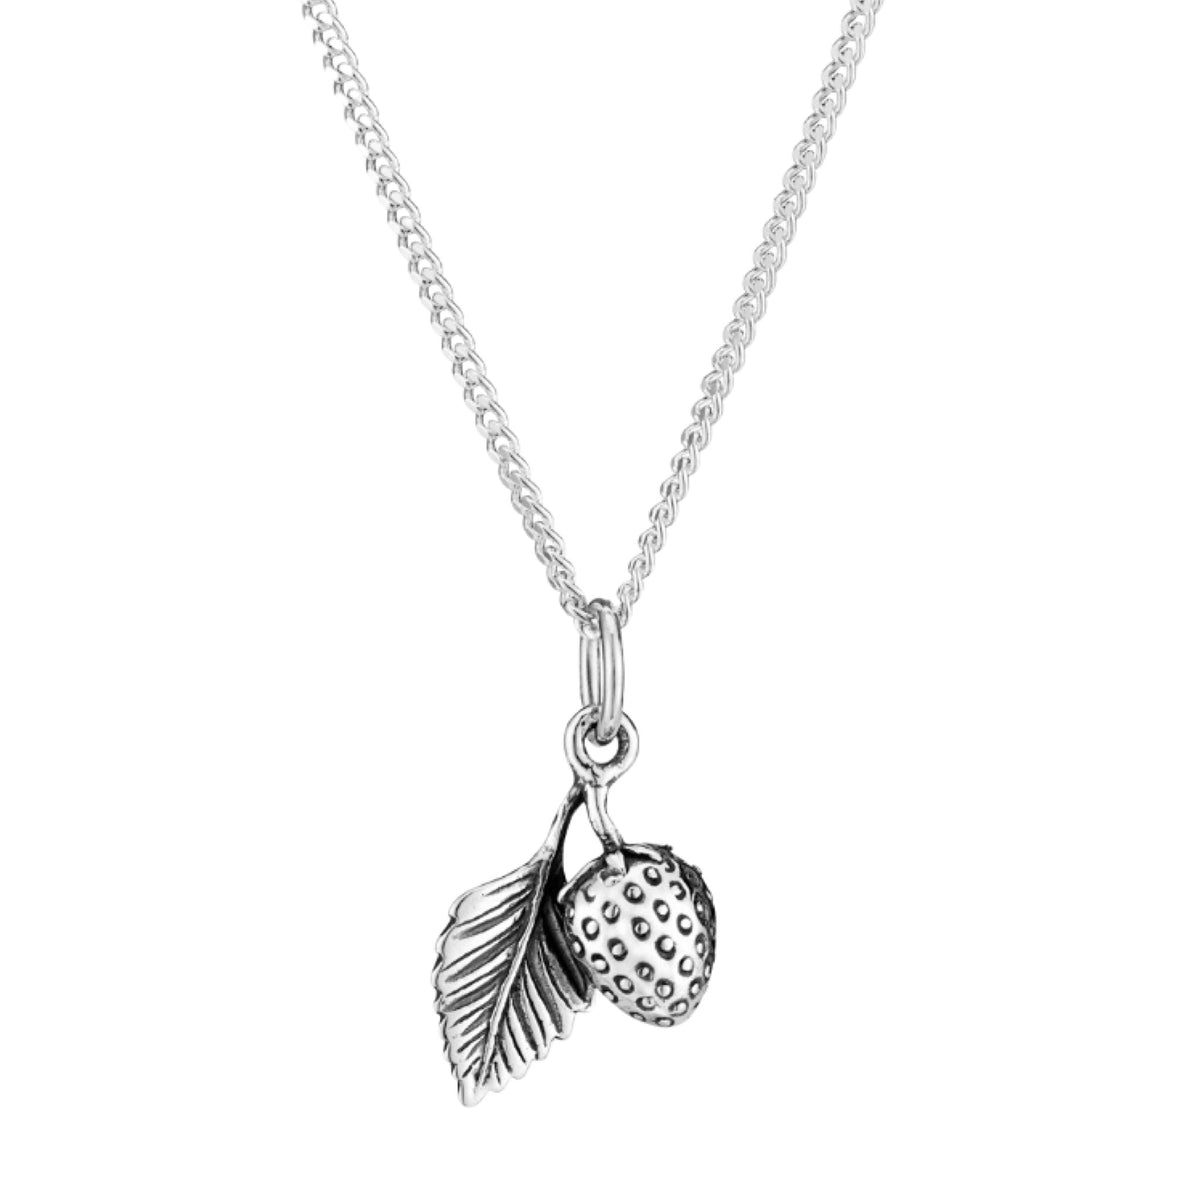 Sterling silver strawberry and leaf necklace boho summer alternative jewellery jewelry